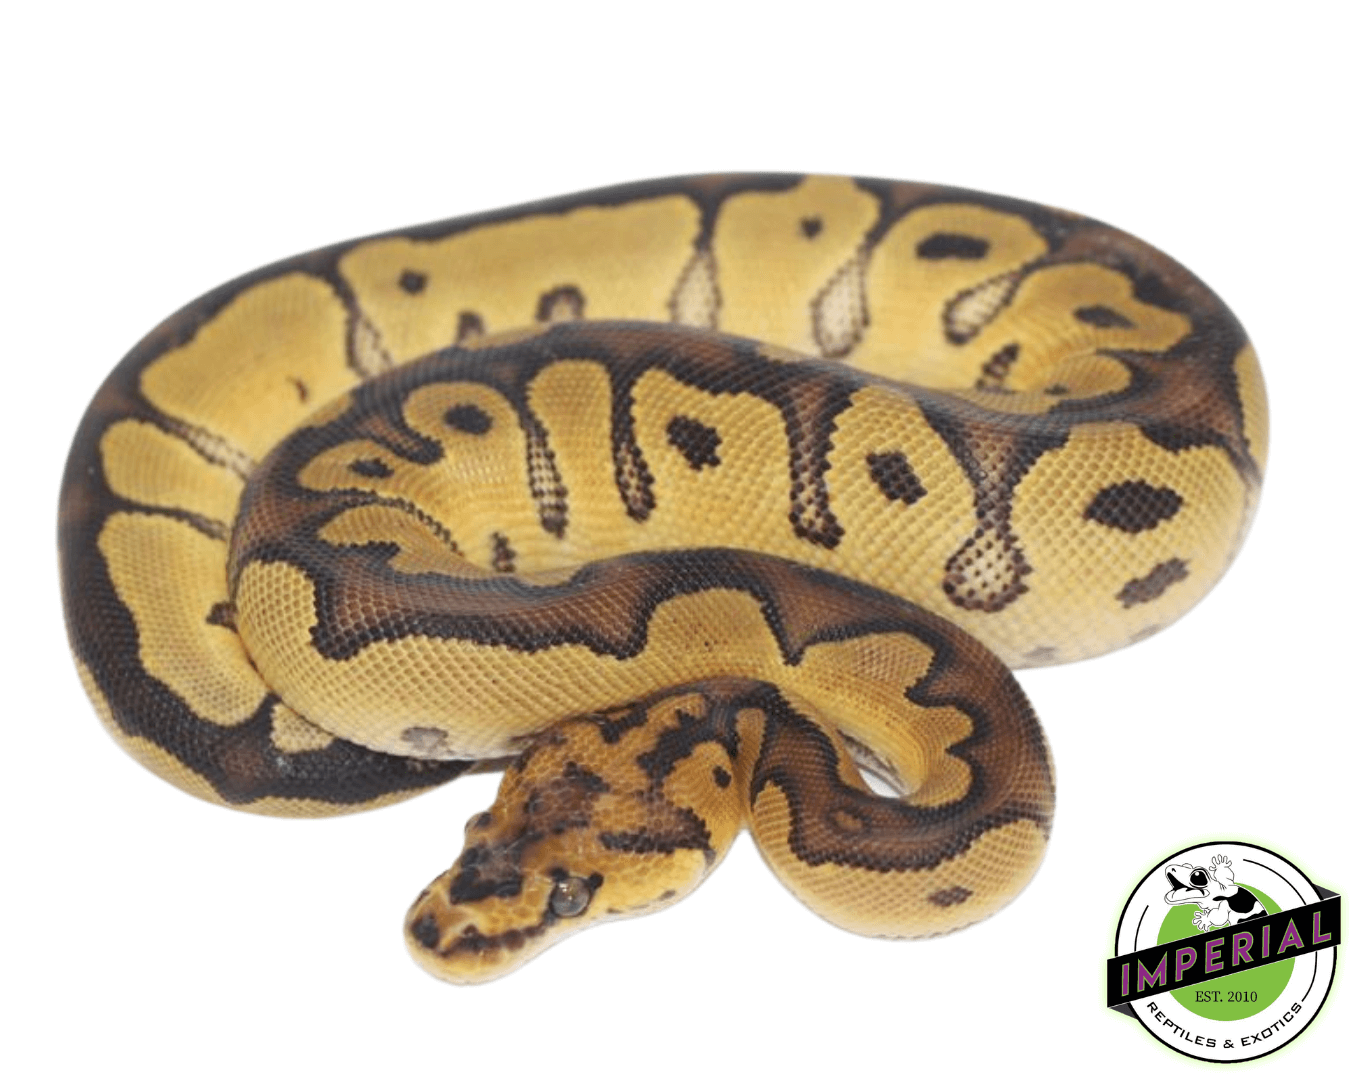 clown ball python for sale, buy reptiles online